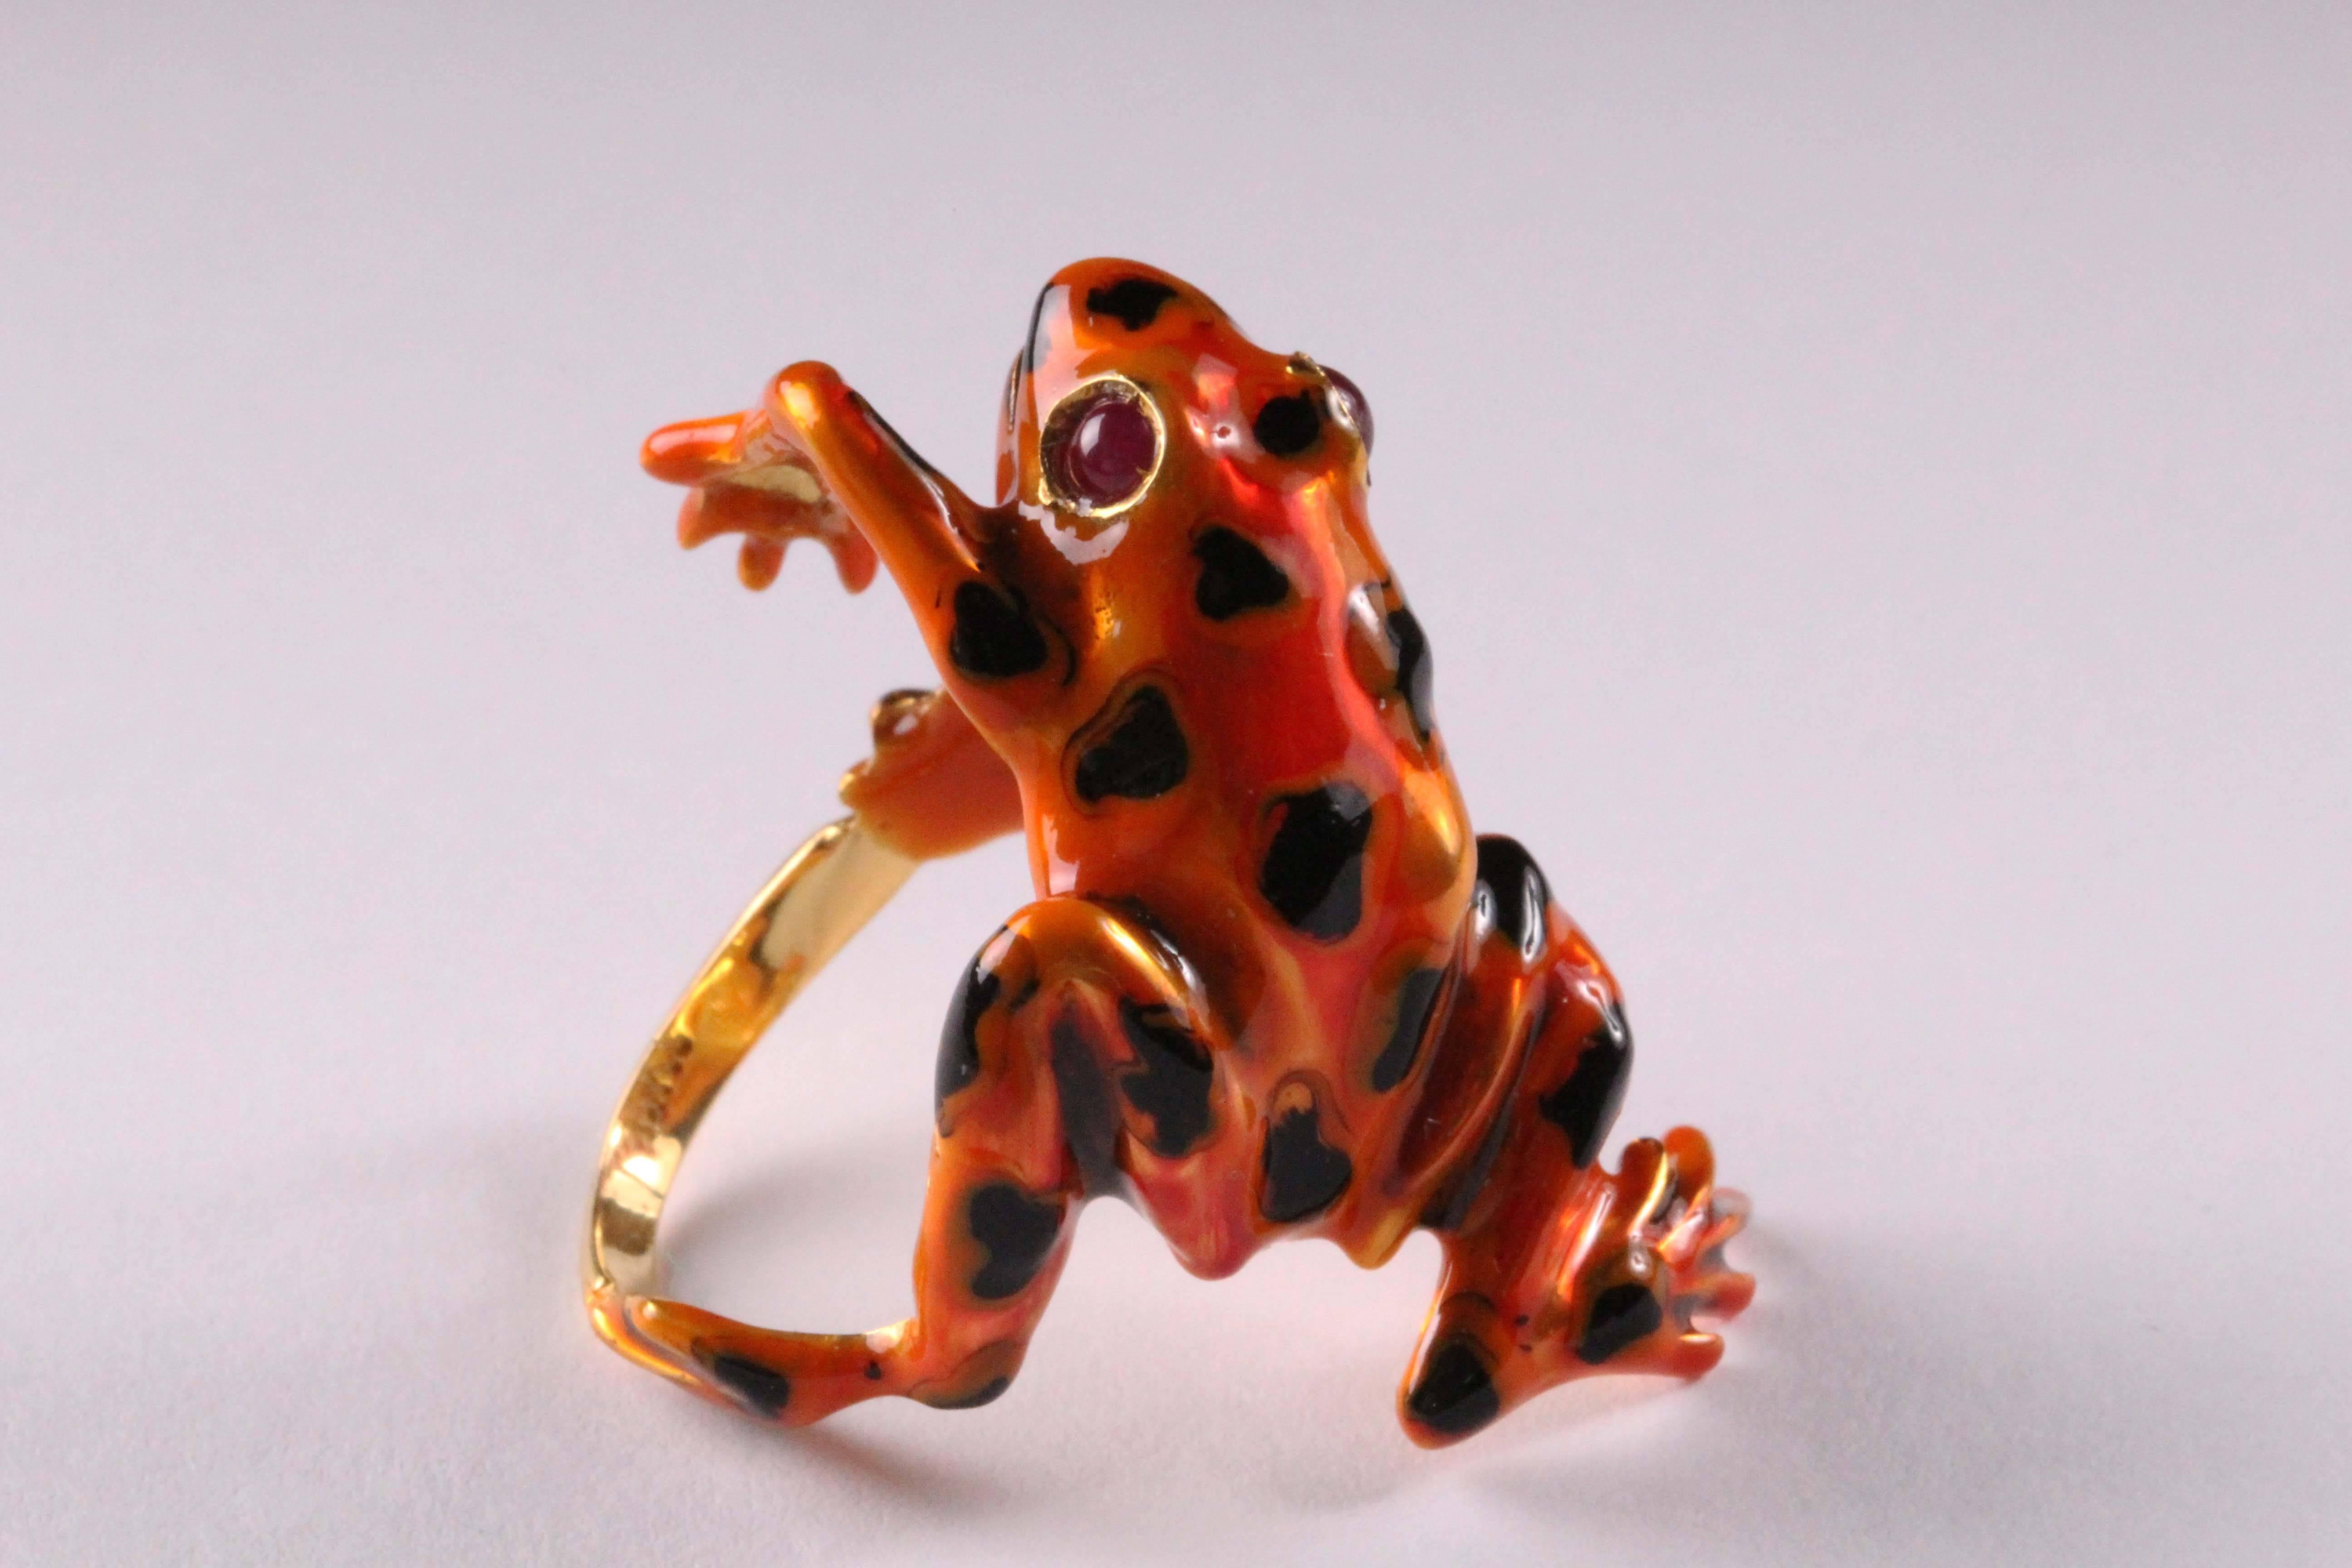 Bertolotti design. Handcrafted in Italy.
Frog fired enamel ring. 14 ct gold
